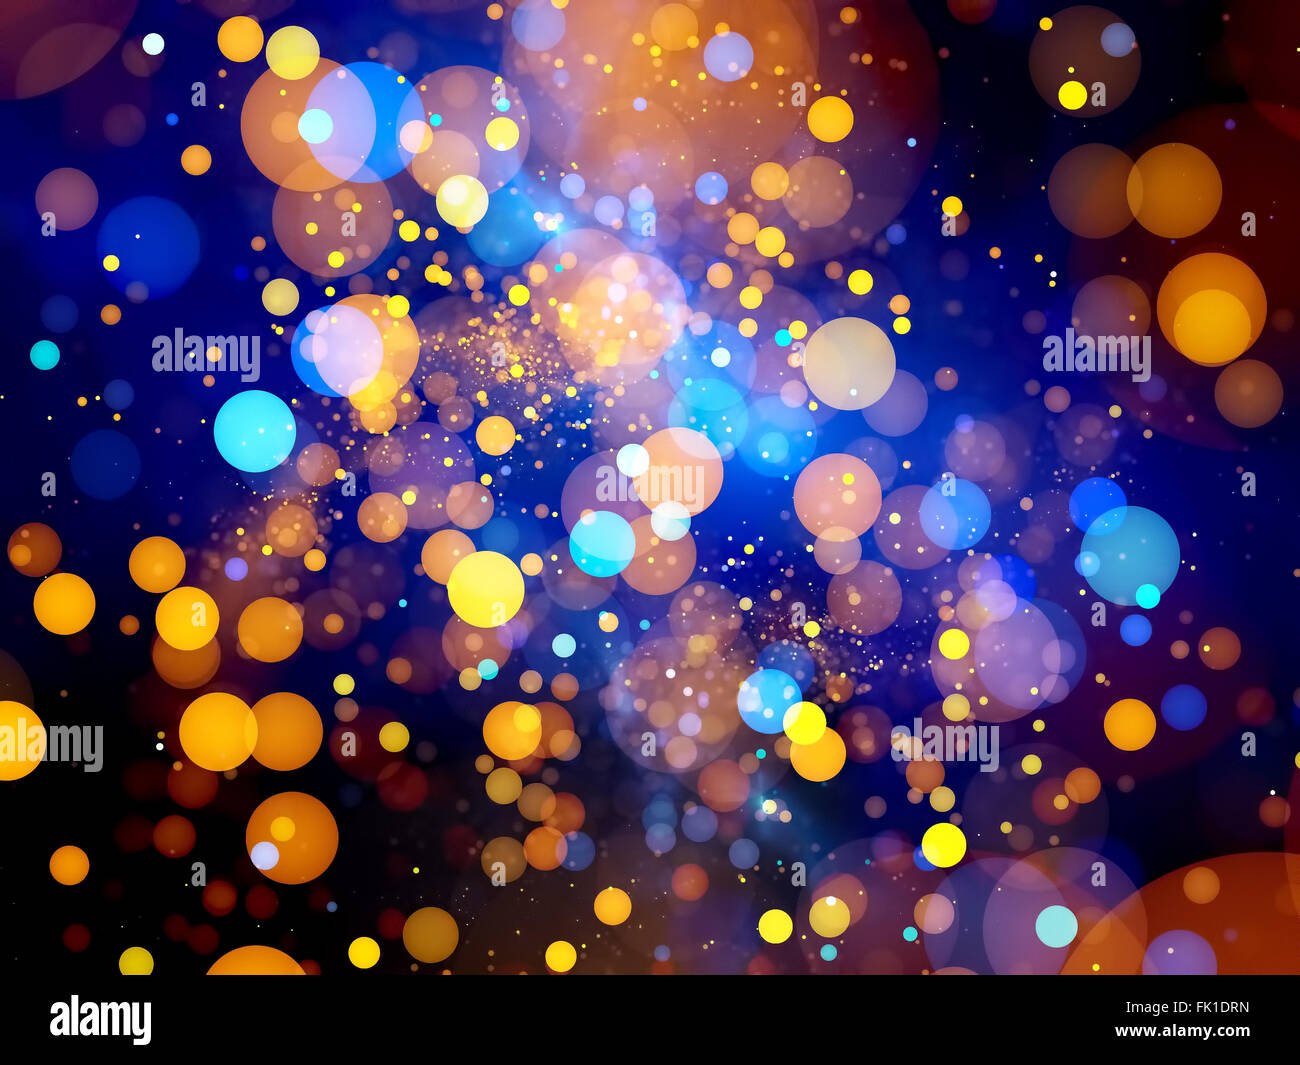 Colorful orange blue bubble bokeh fractal, computer generated abstract ...